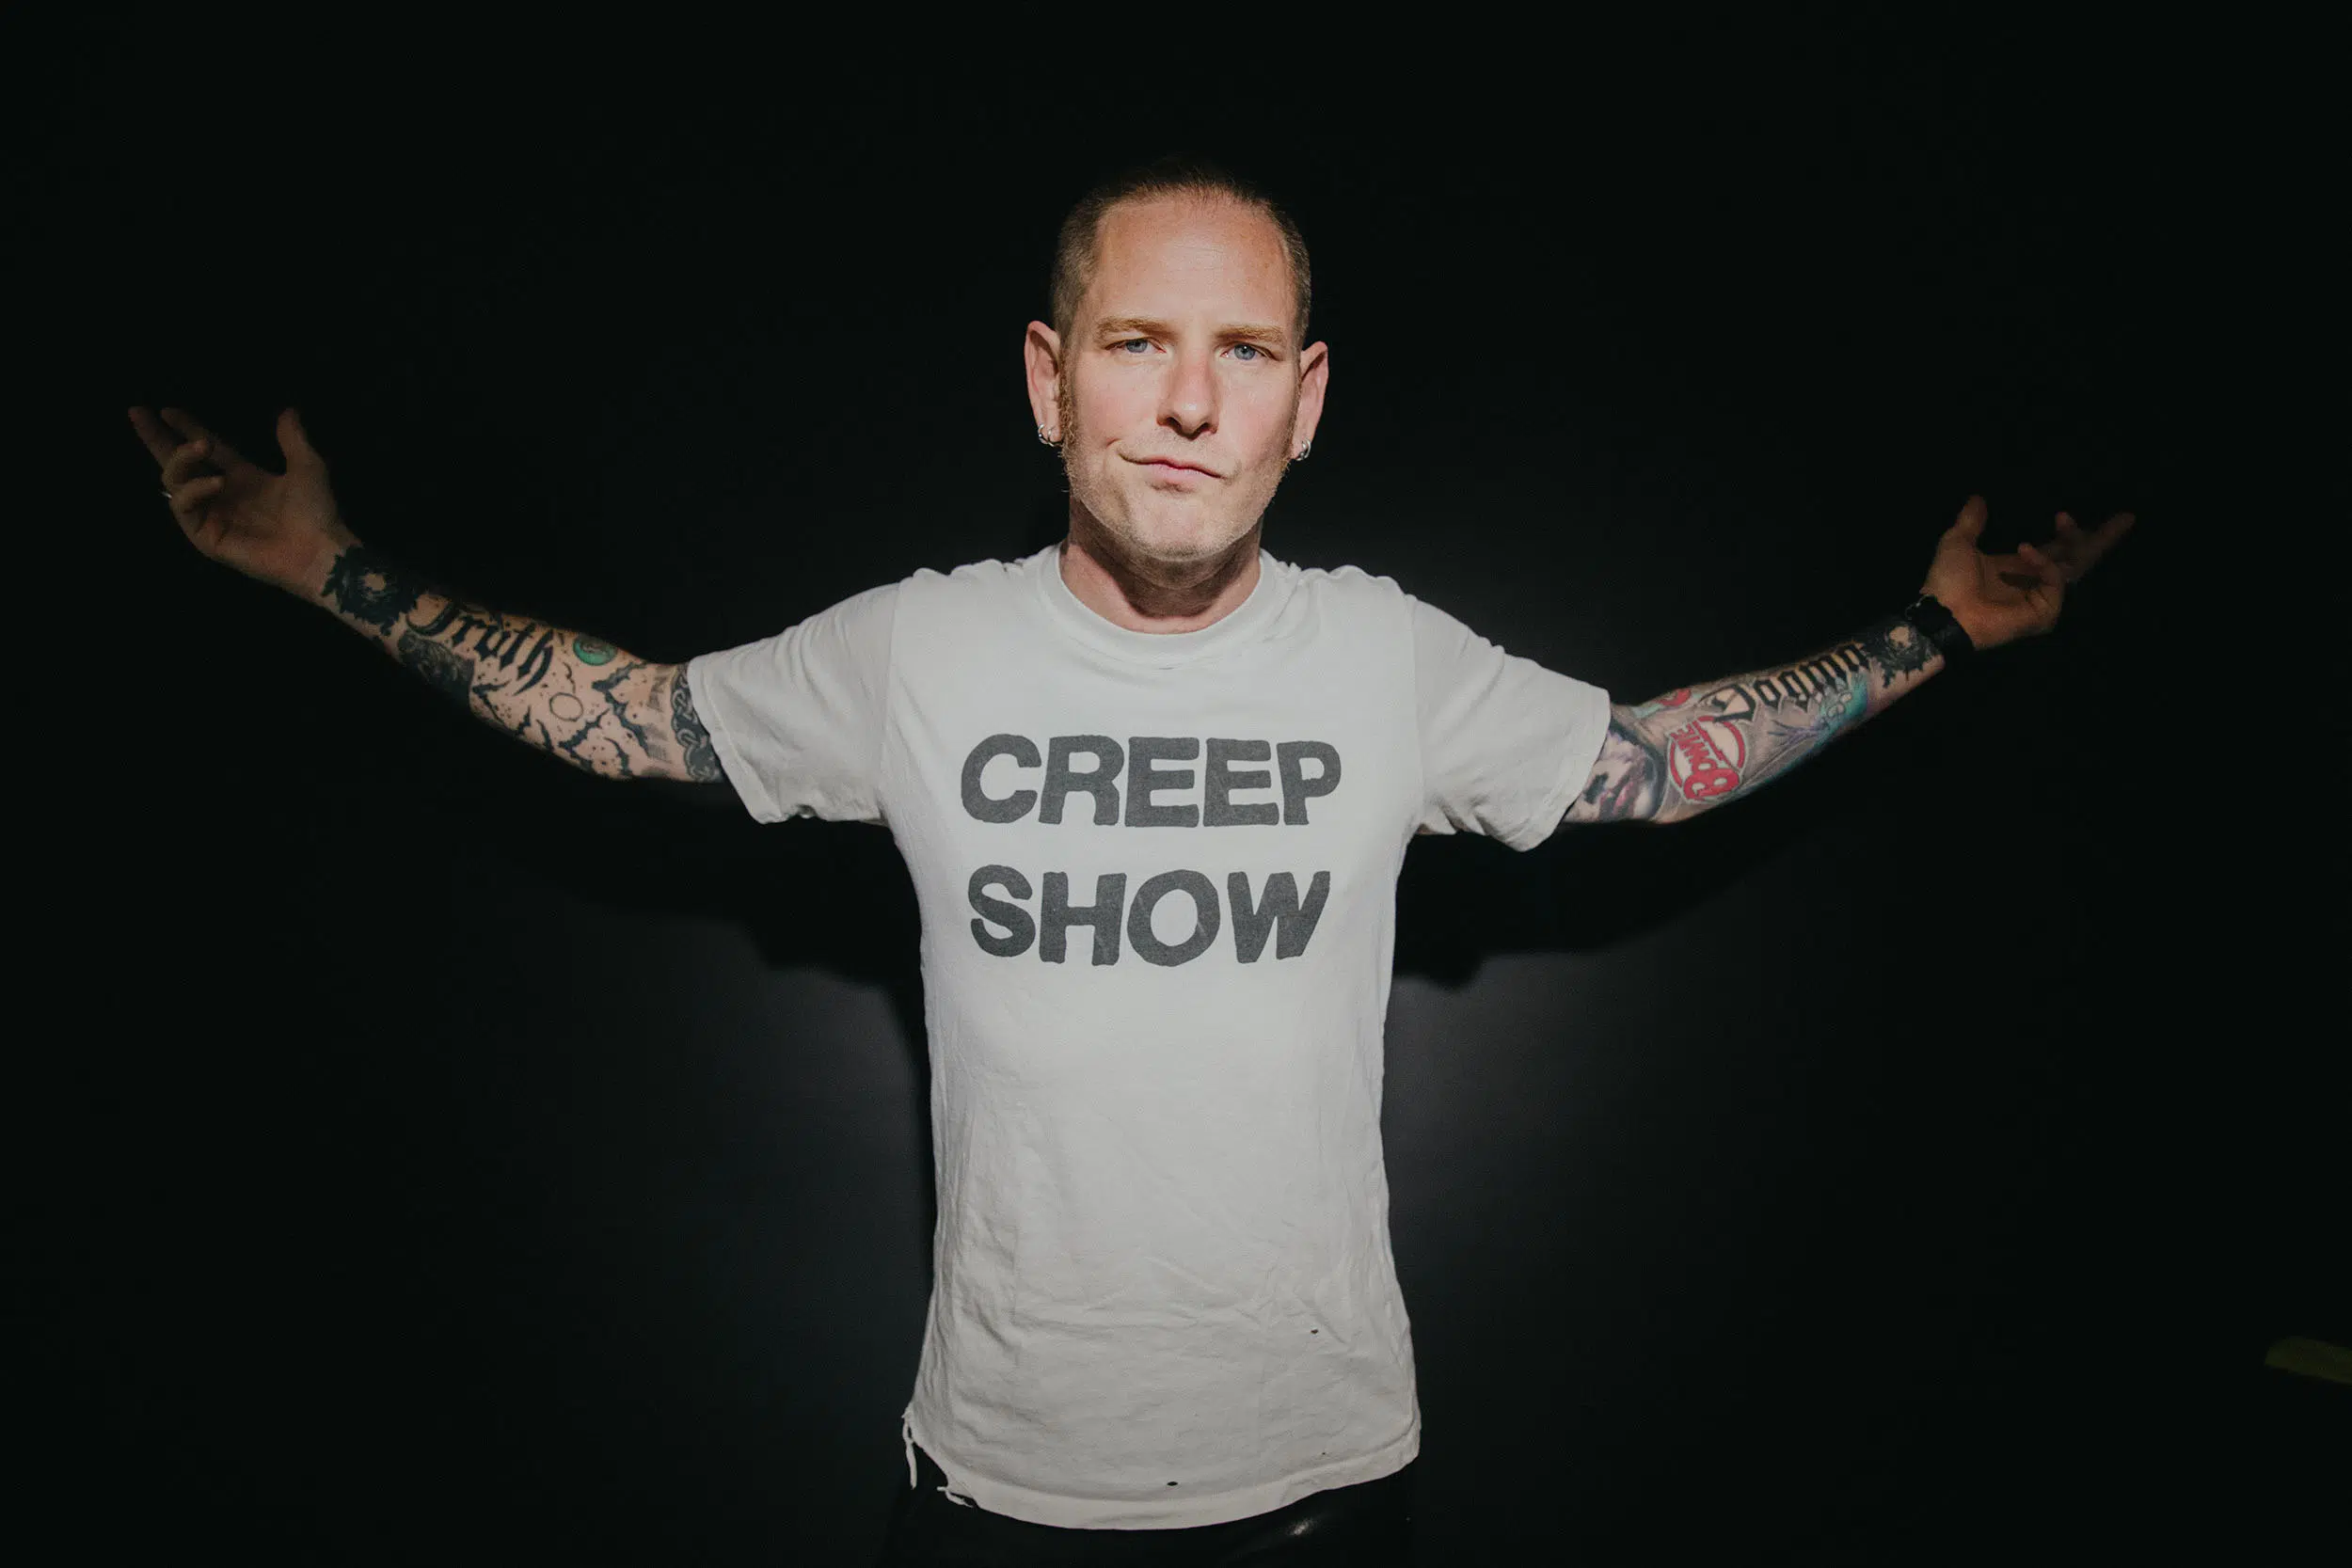 New music from Corey Taylor - but not what you think